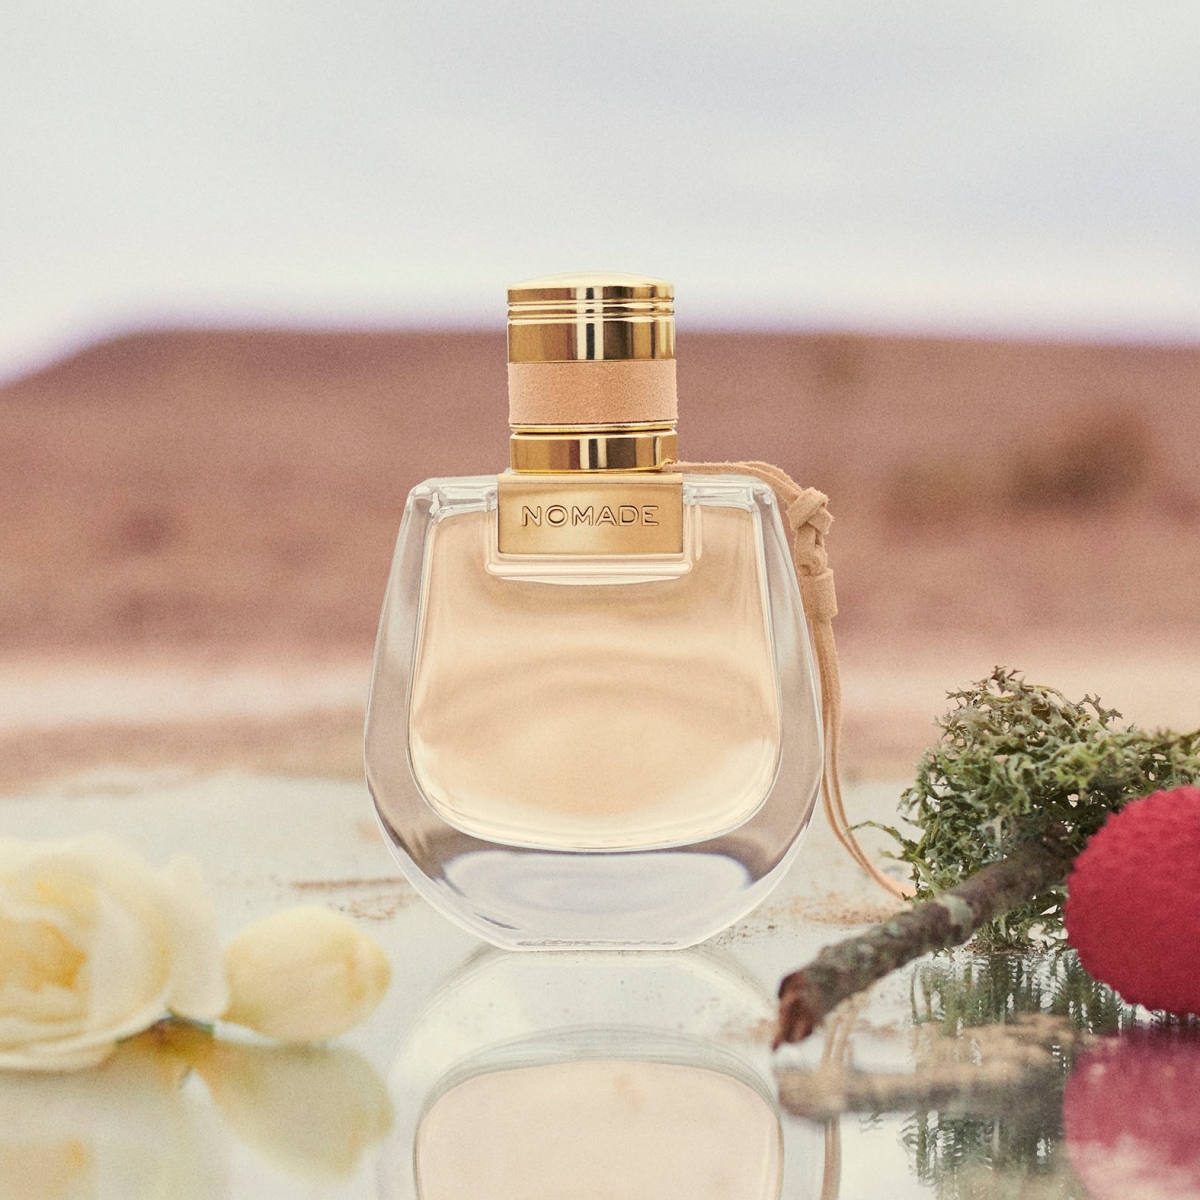 Fragrance Review: Chloé – Nomade – A Tea-Scented Library